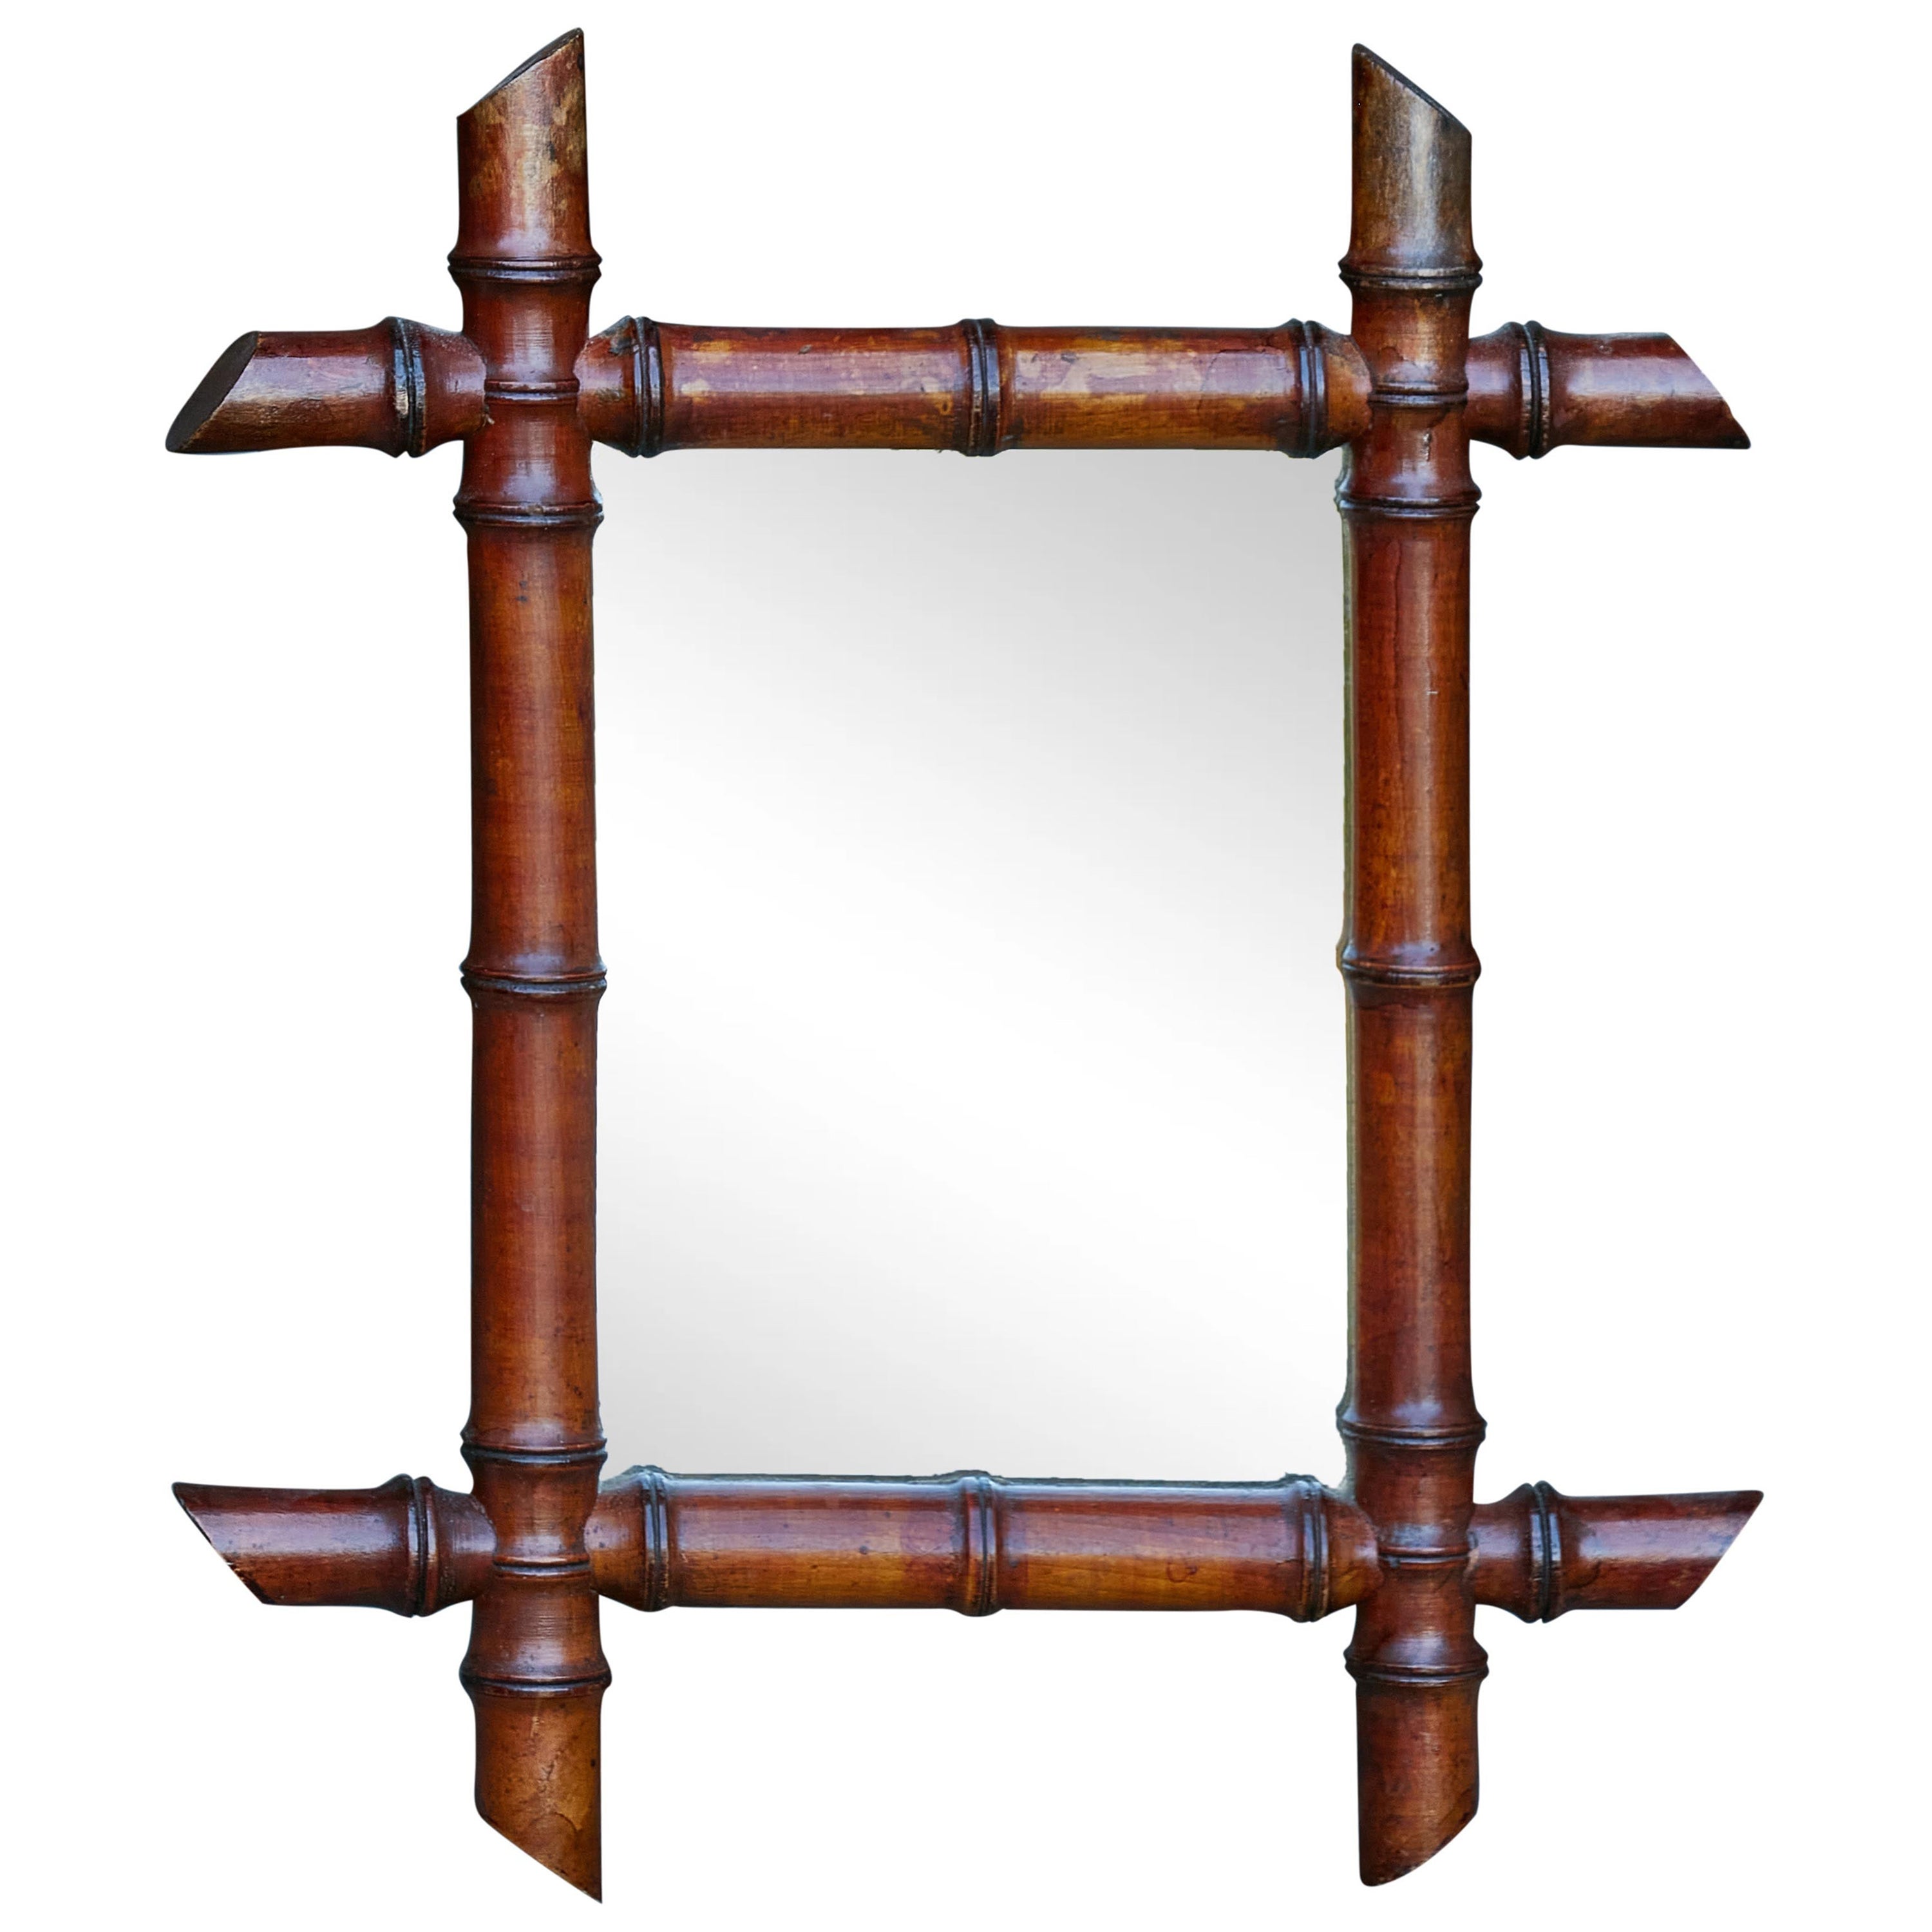 Petite French Faux Bamboo Walnut Mirror circa 1920 with Slanted Accents